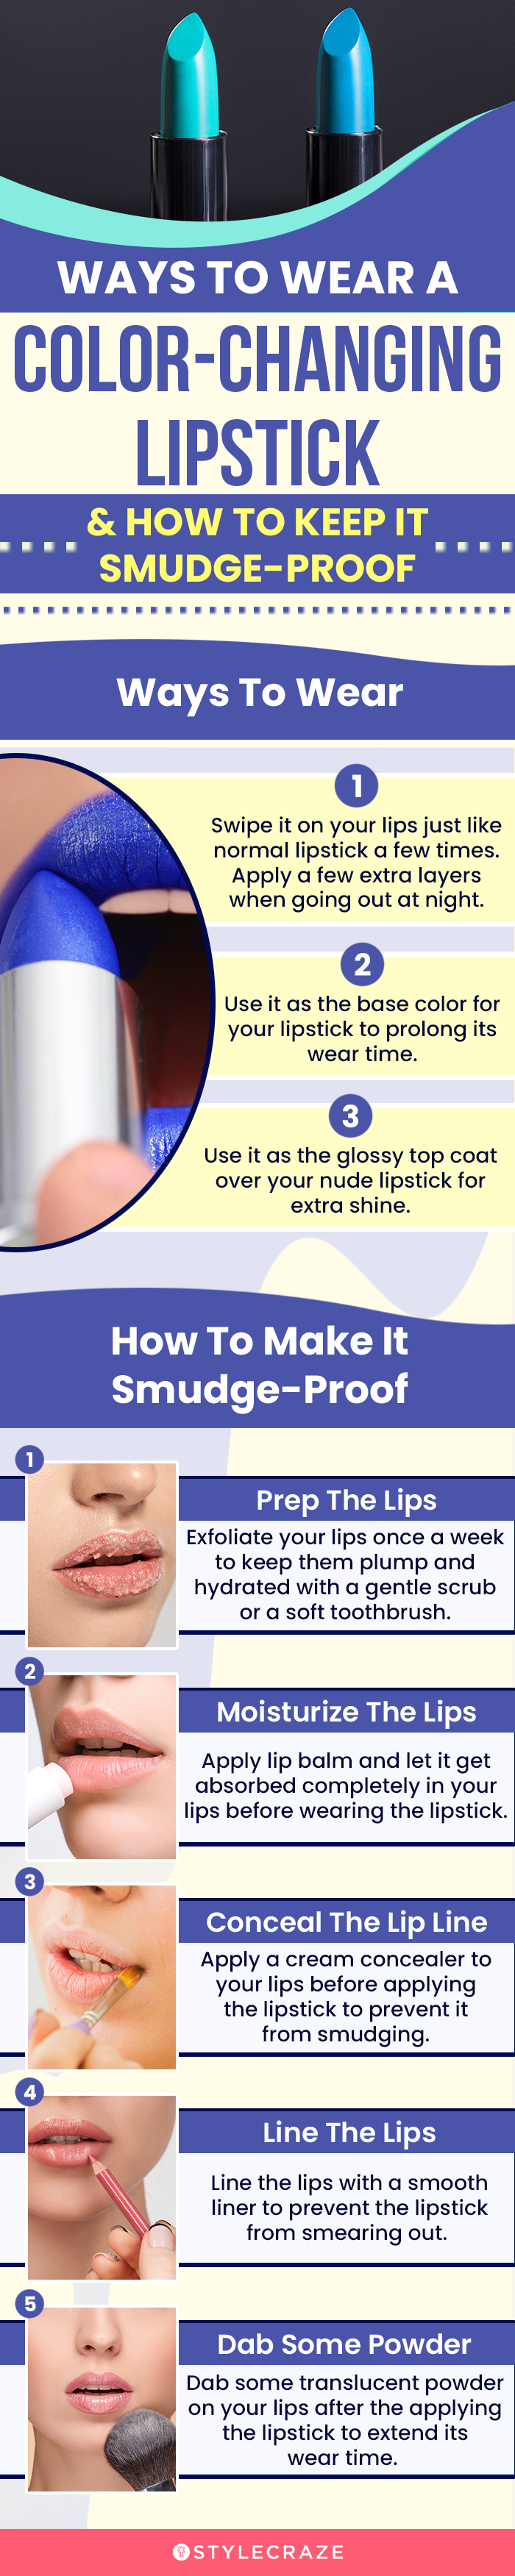 Ways To Wear A Color-Changing Lipstick (infographic)